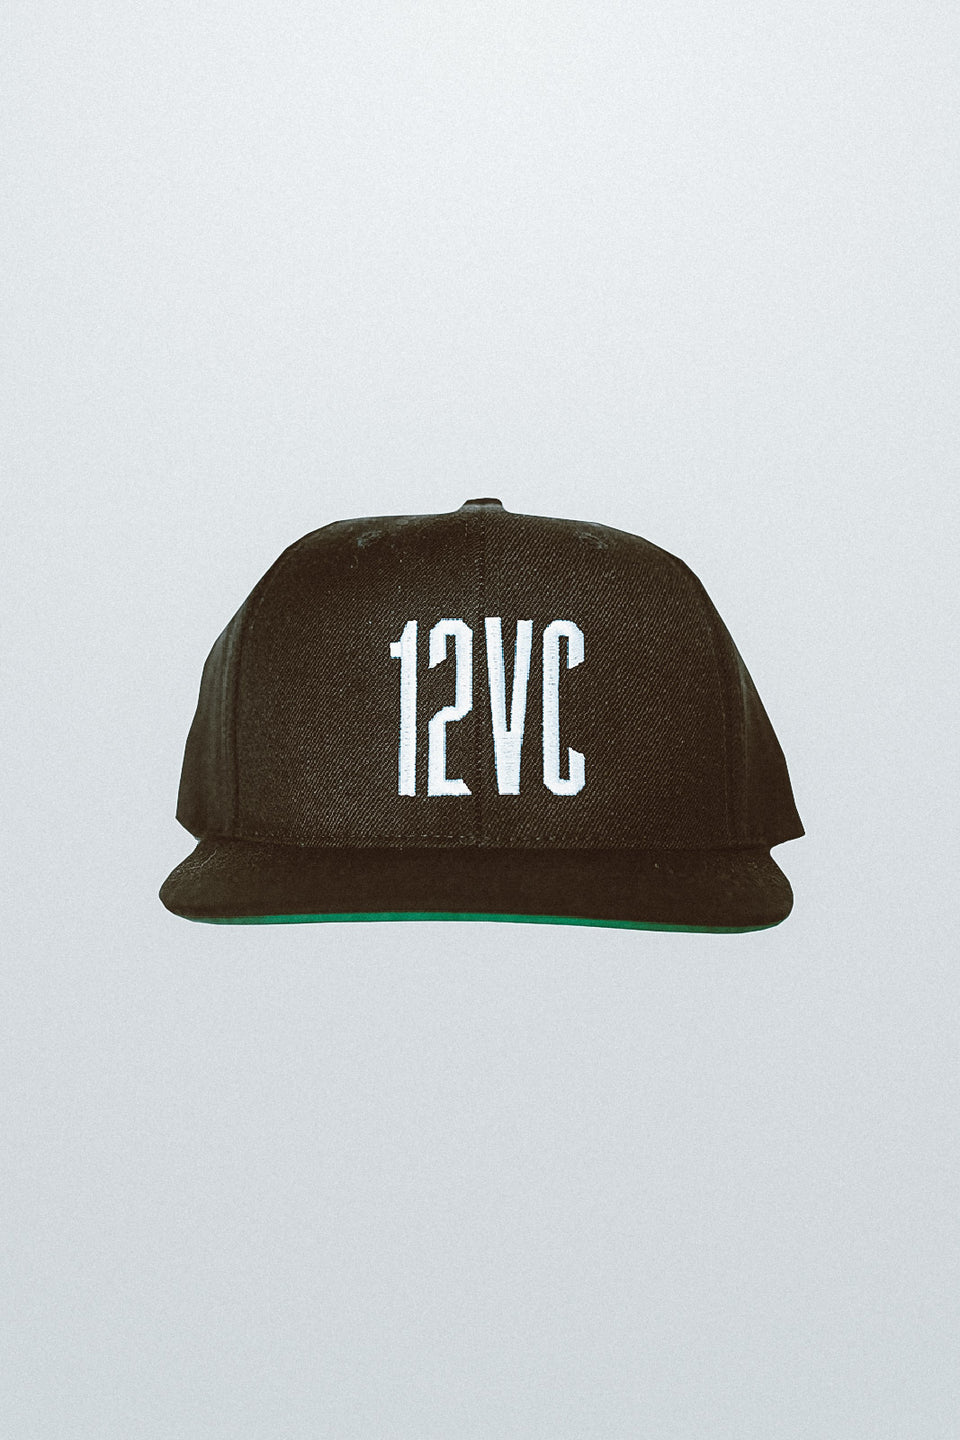 Embroidered Snapback